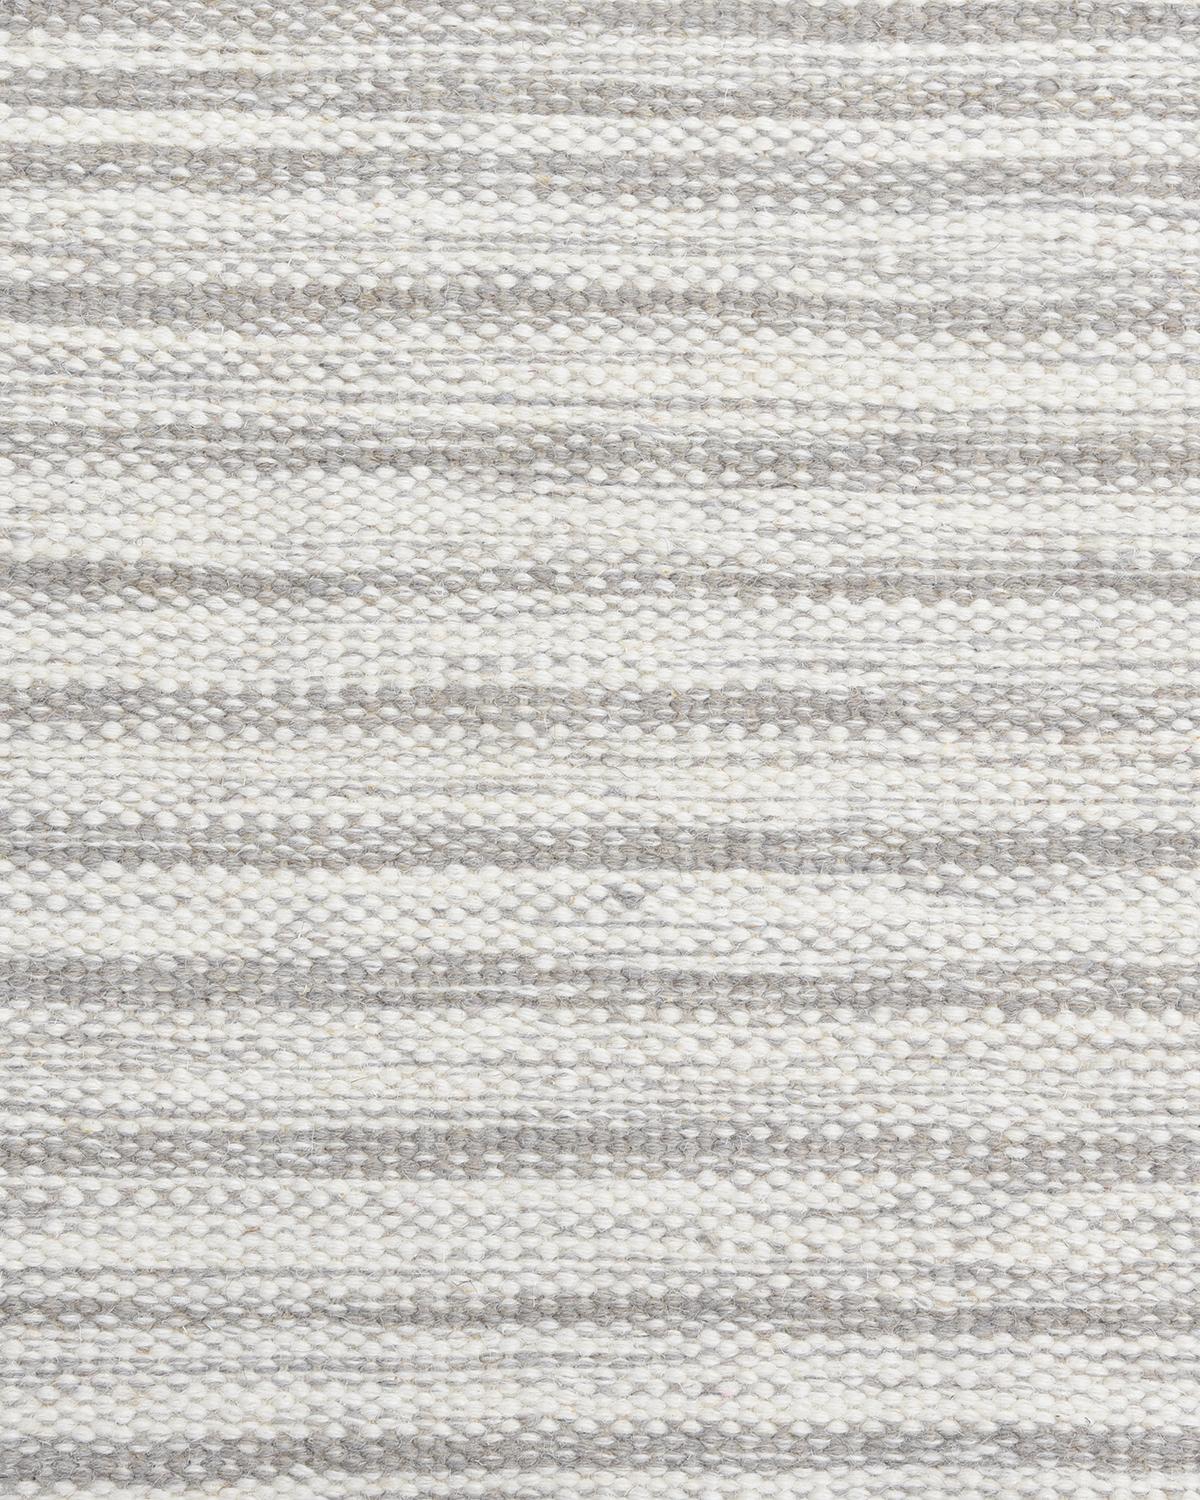 Indian Solo Rugs George Contemporary Striped Handmade Area Rug Light Gray For Sale